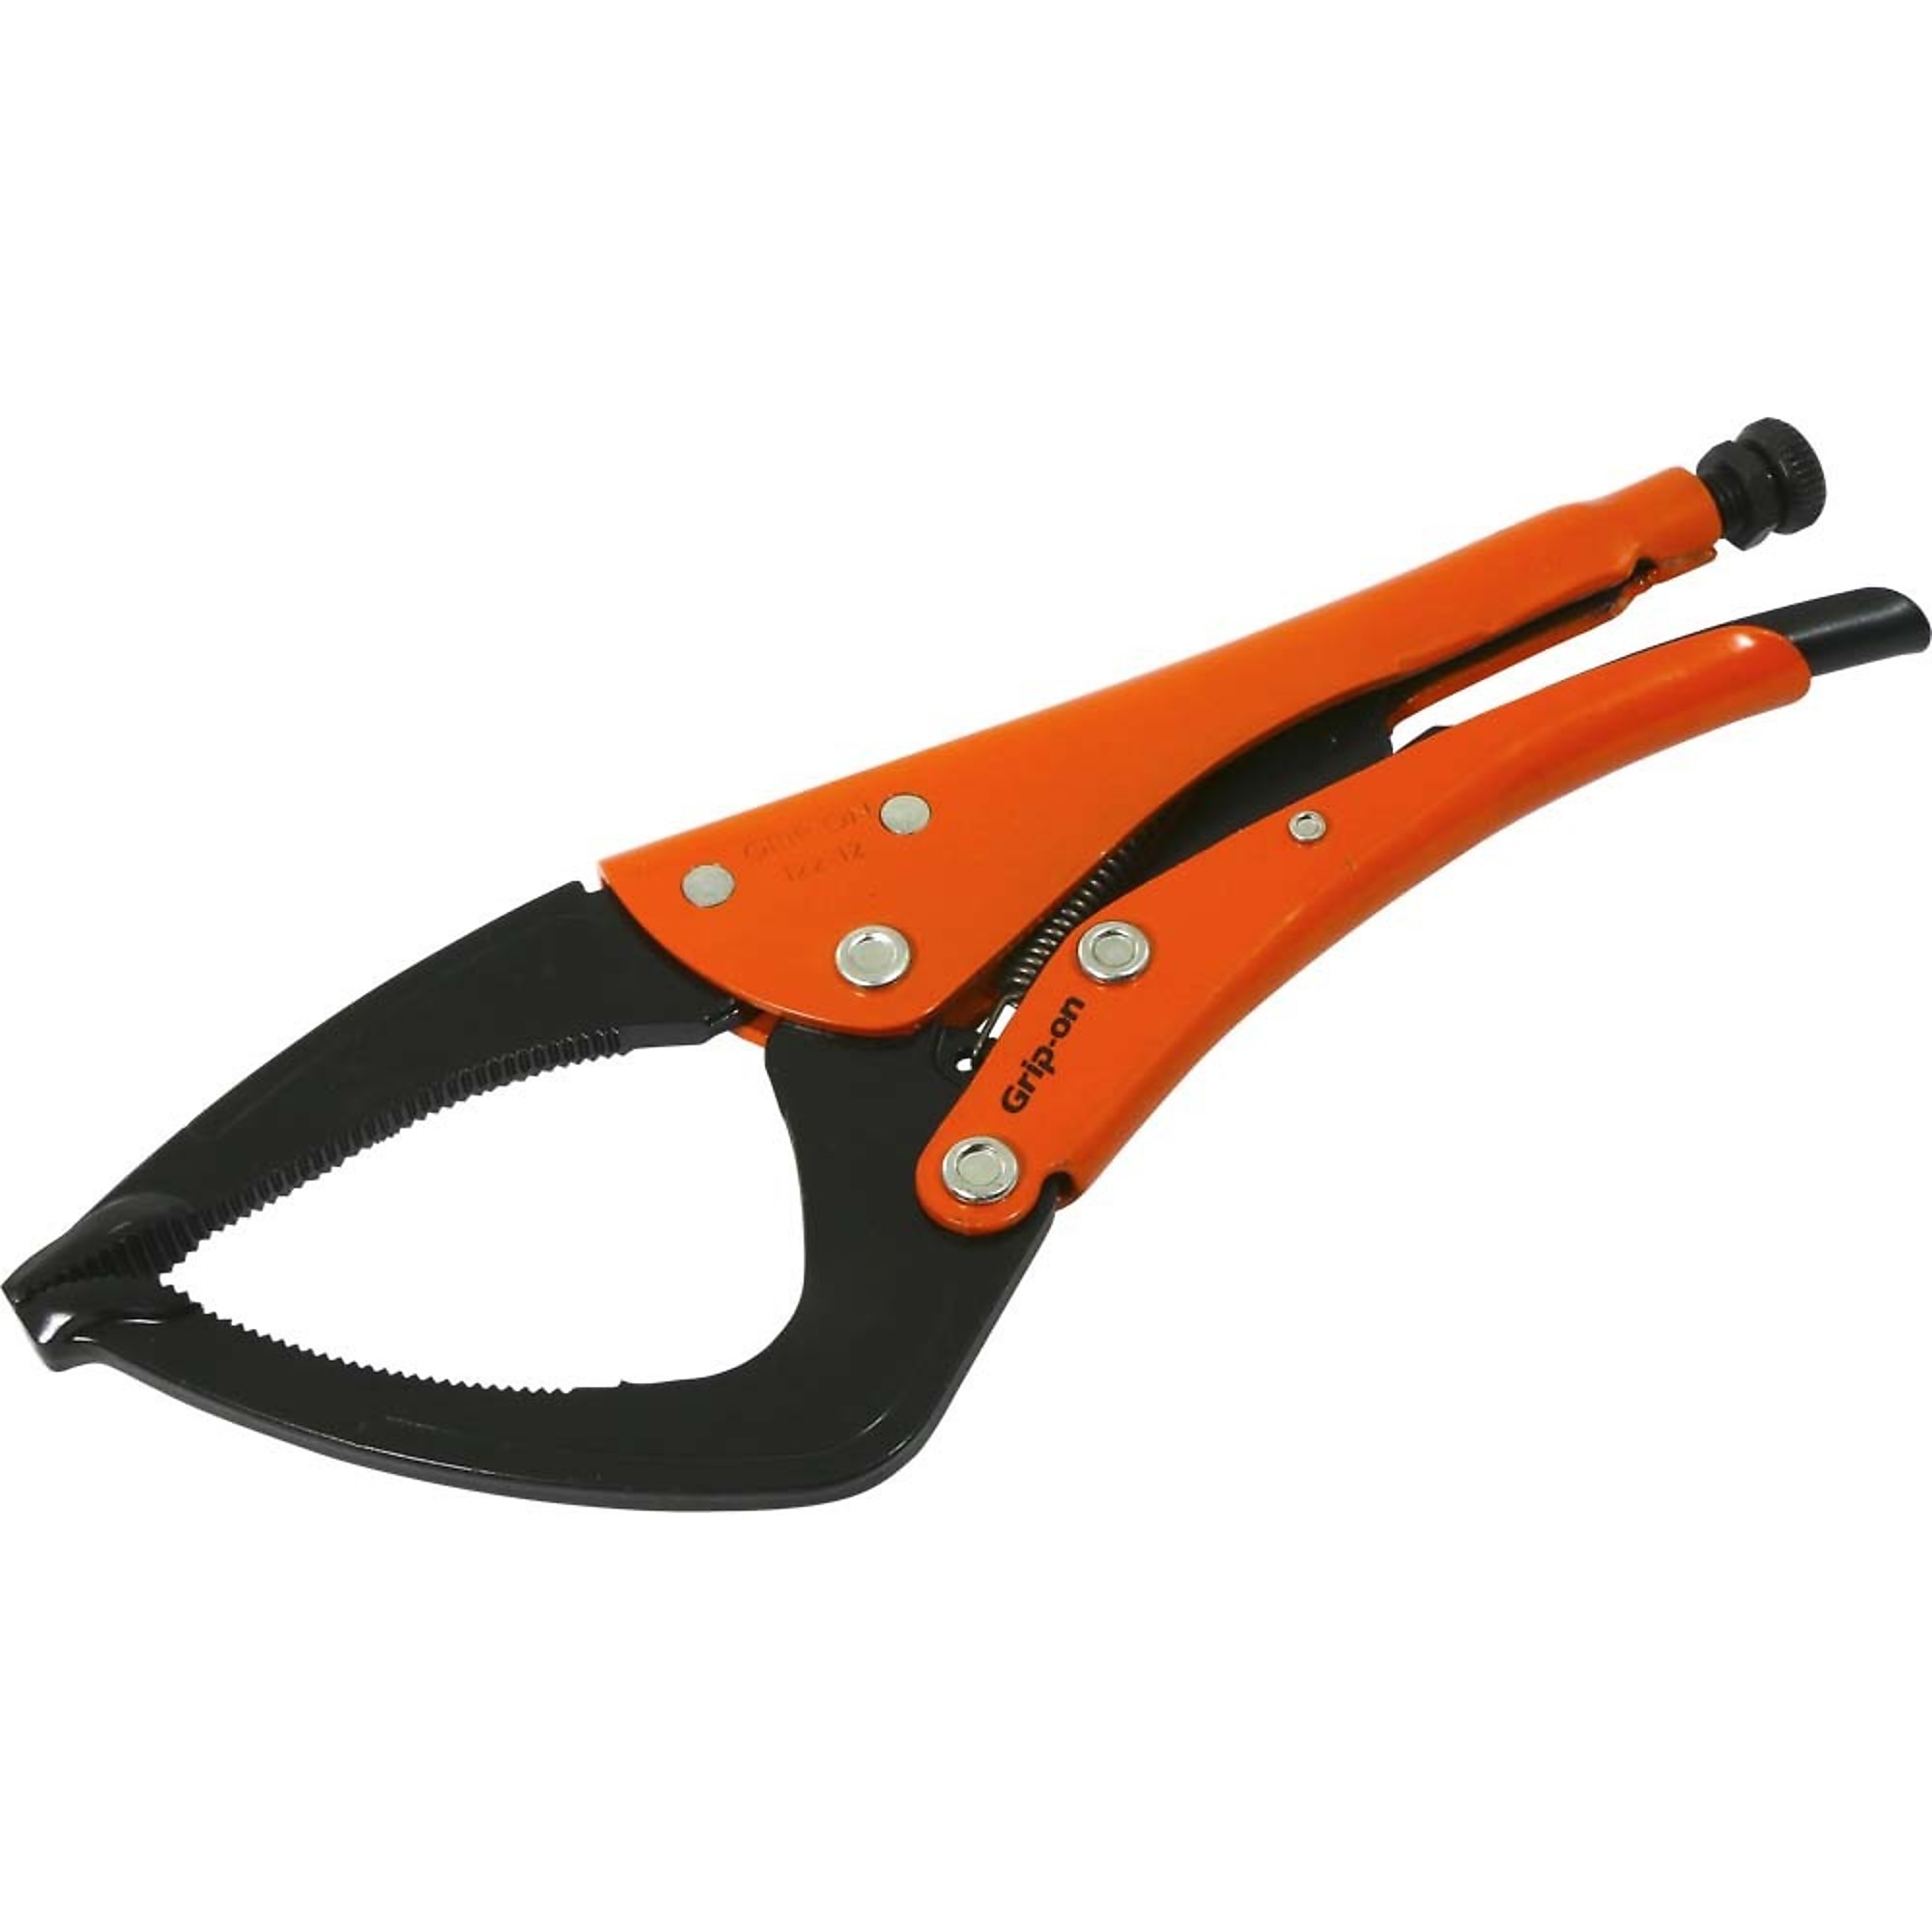 Grip-on, 12Inch Locking Pliers Groovy Grip, Pieces (qty.) 1 Material Alloy Steel, Jaw Capacity 4.41 in, Model 122-12